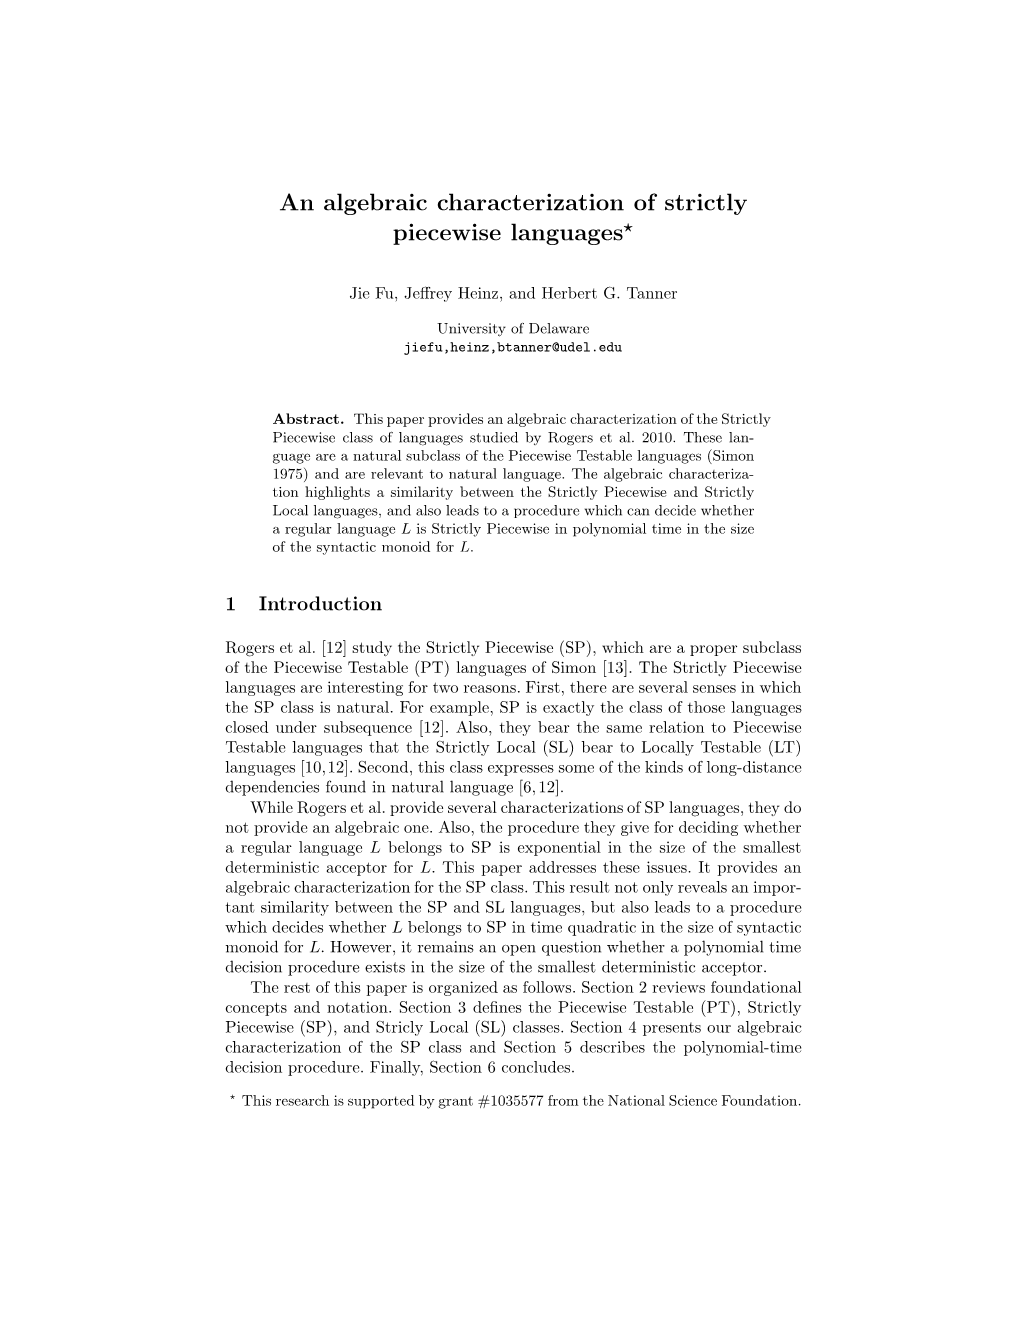 An Algebraic Characterization of Strictly Piecewise Languages⋆